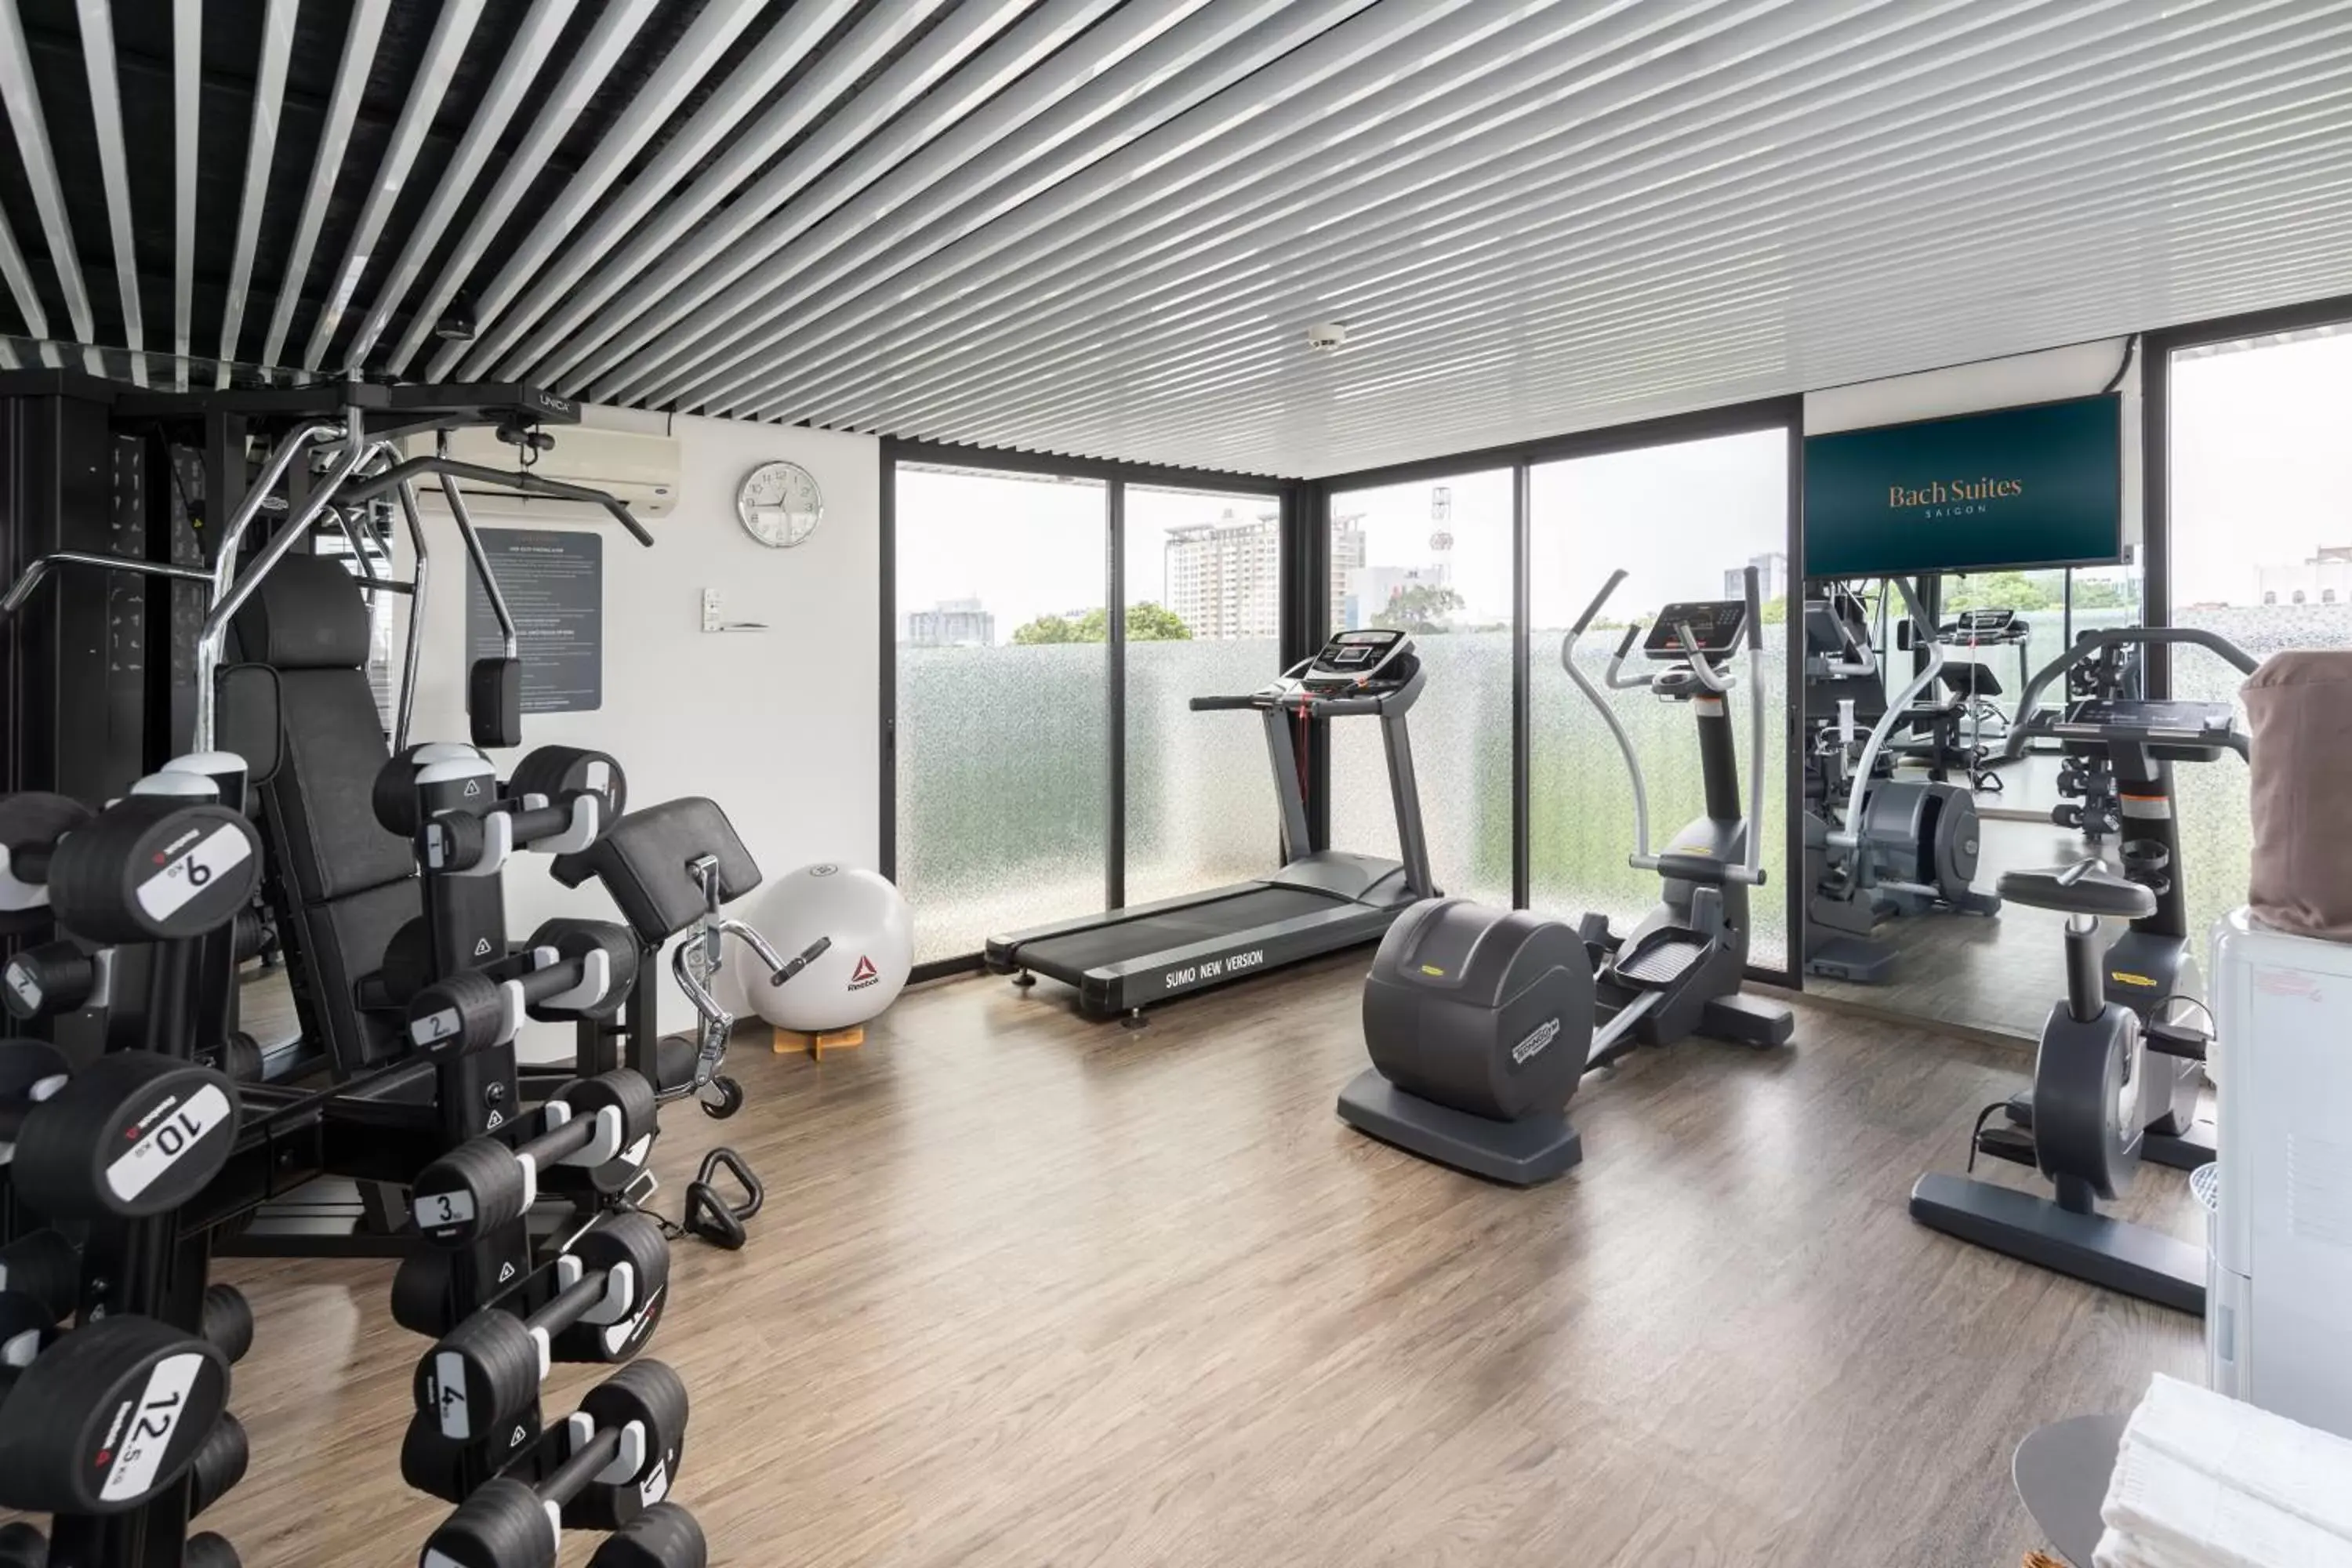 Fitness centre/facilities, Fitness Center/Facilities in Bach Suites Saigon, a Member of Design Hotels